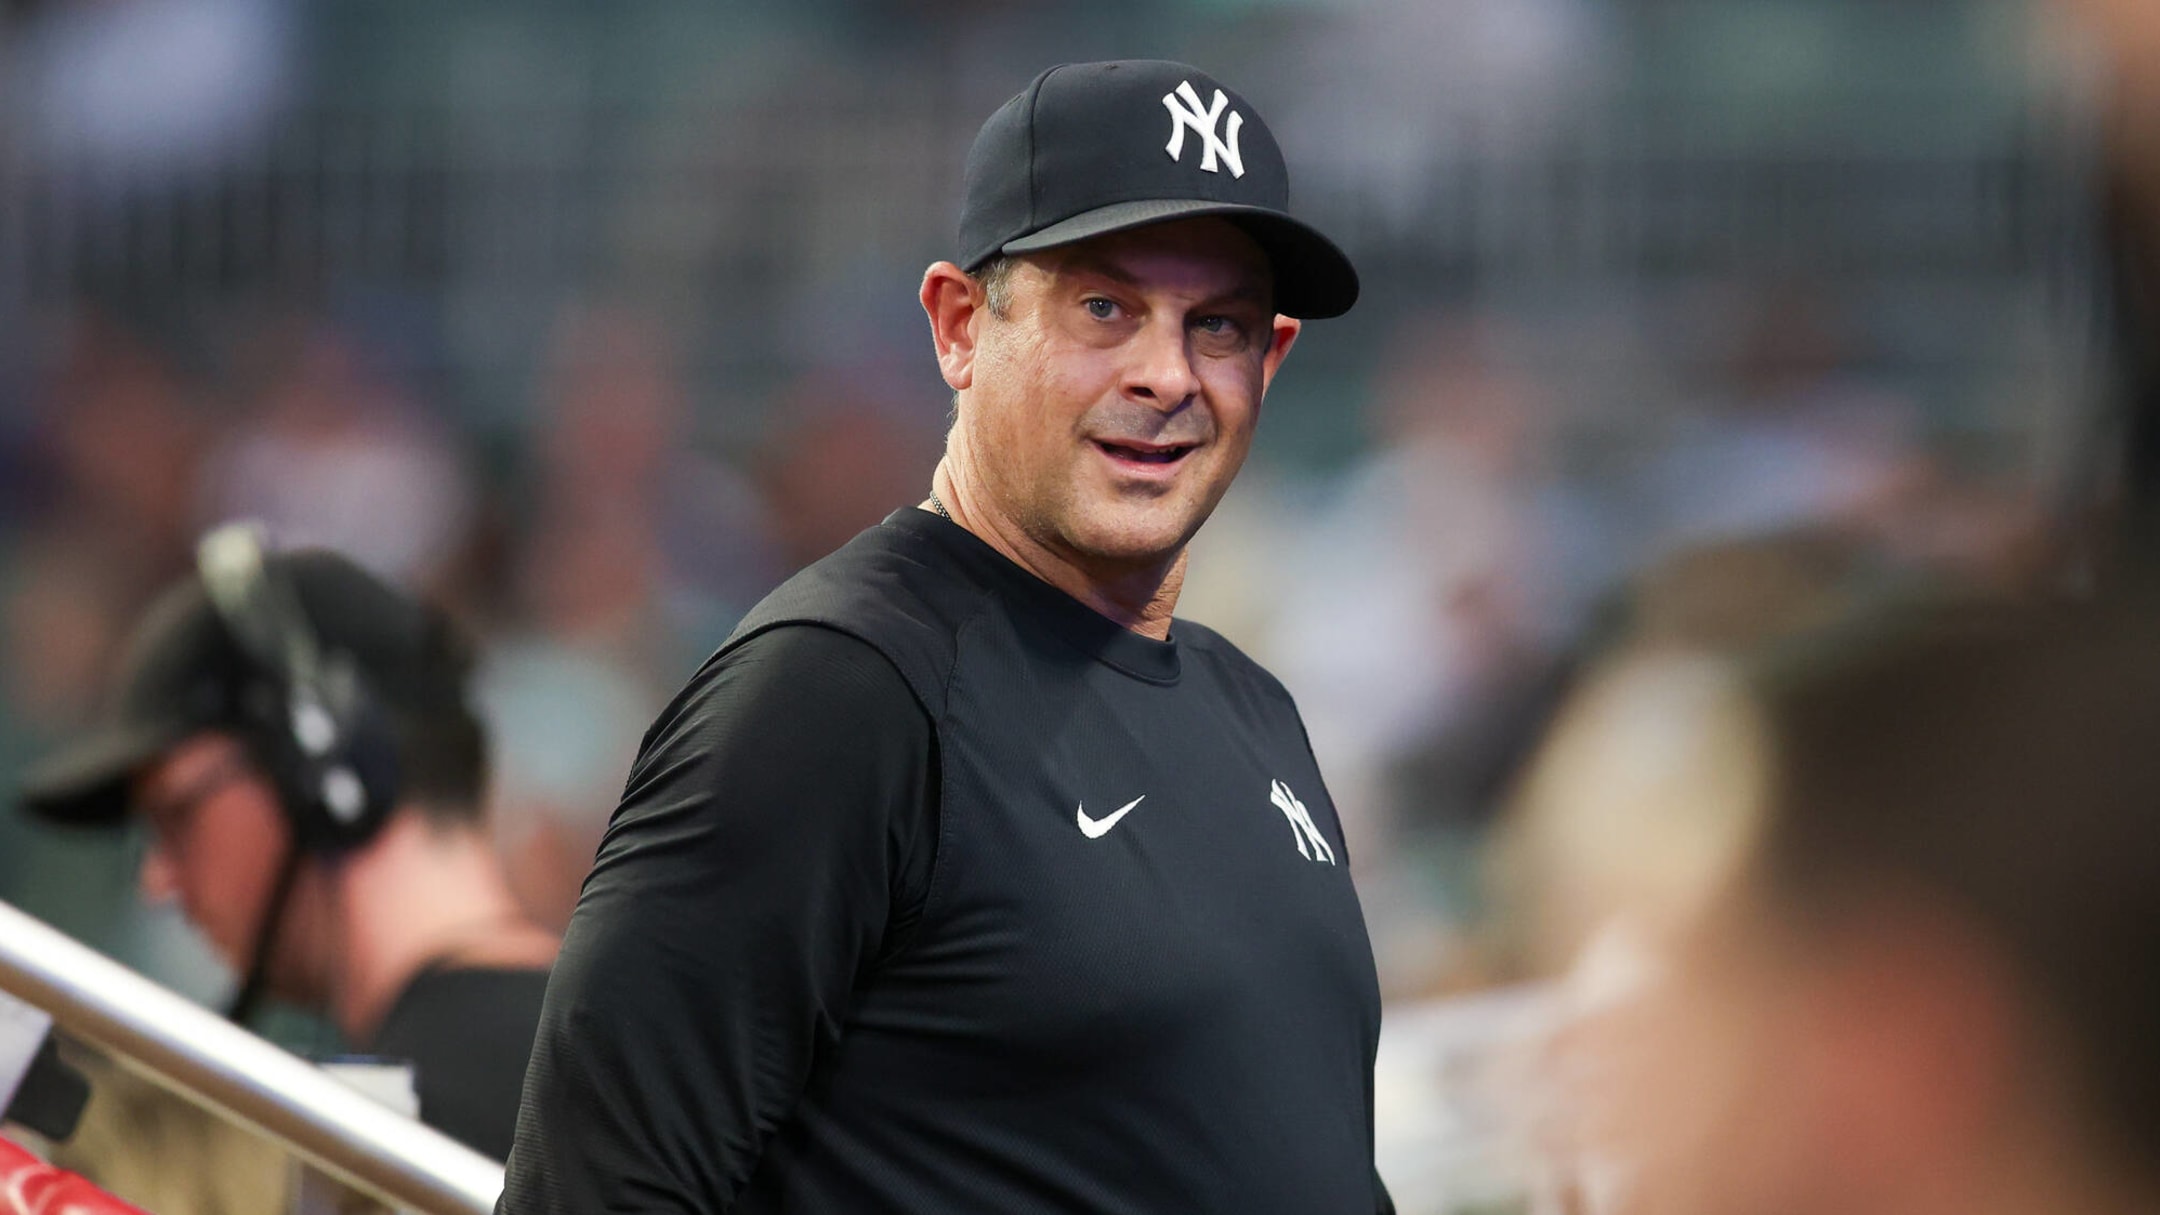 Yankees' Aaron Boone on the hot seat, MLB insider says 